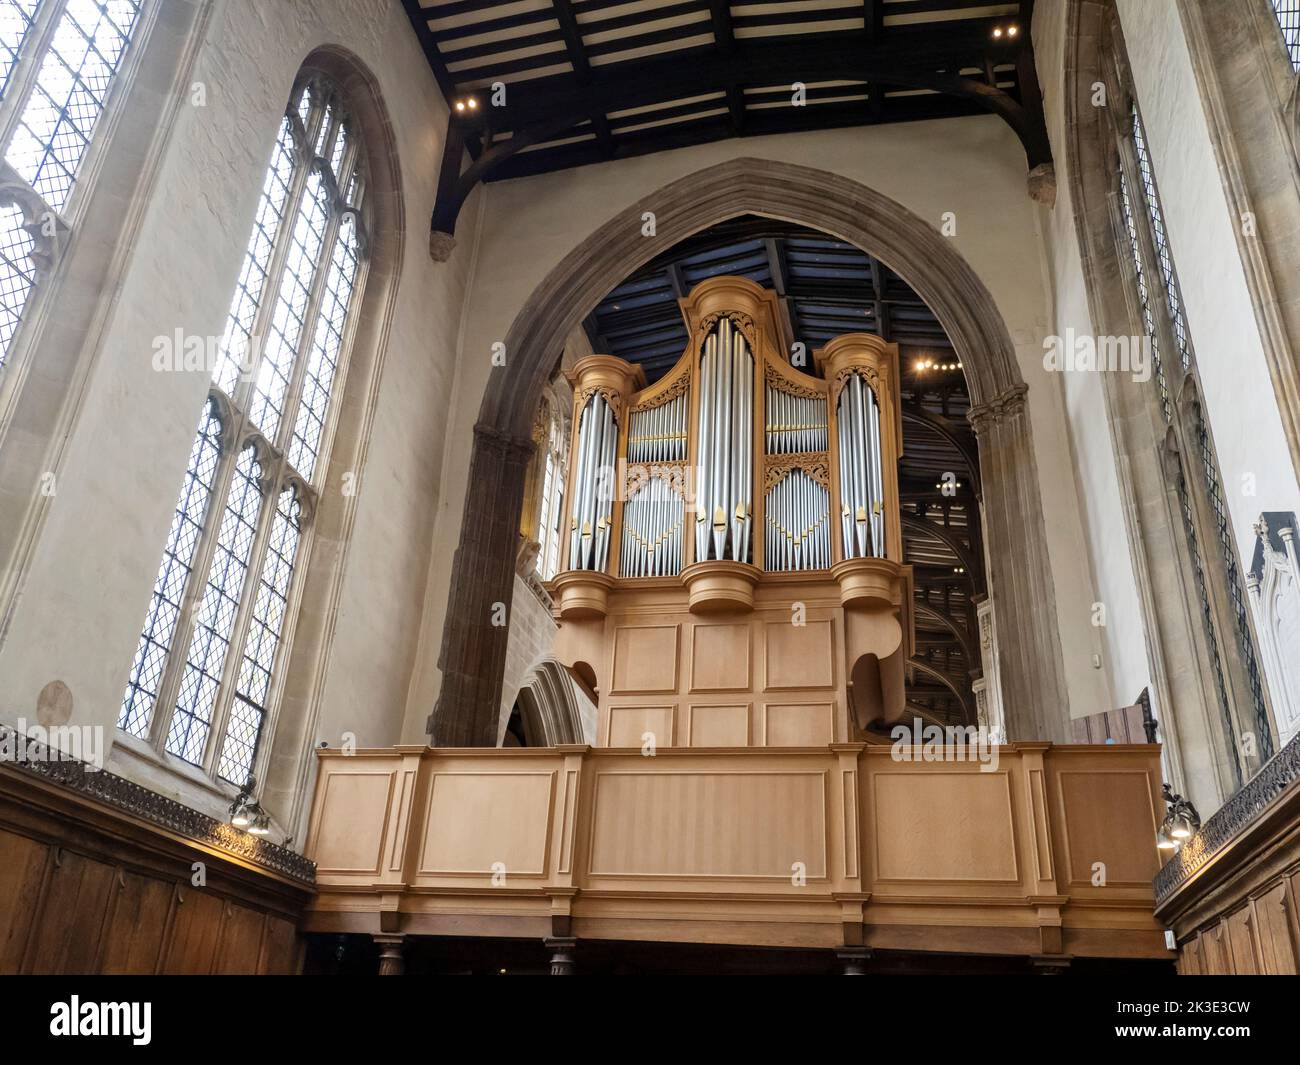 The organ in the University Church of St Mary the Virgin in Oxford, Oxfordshire, UK. Stock Photo